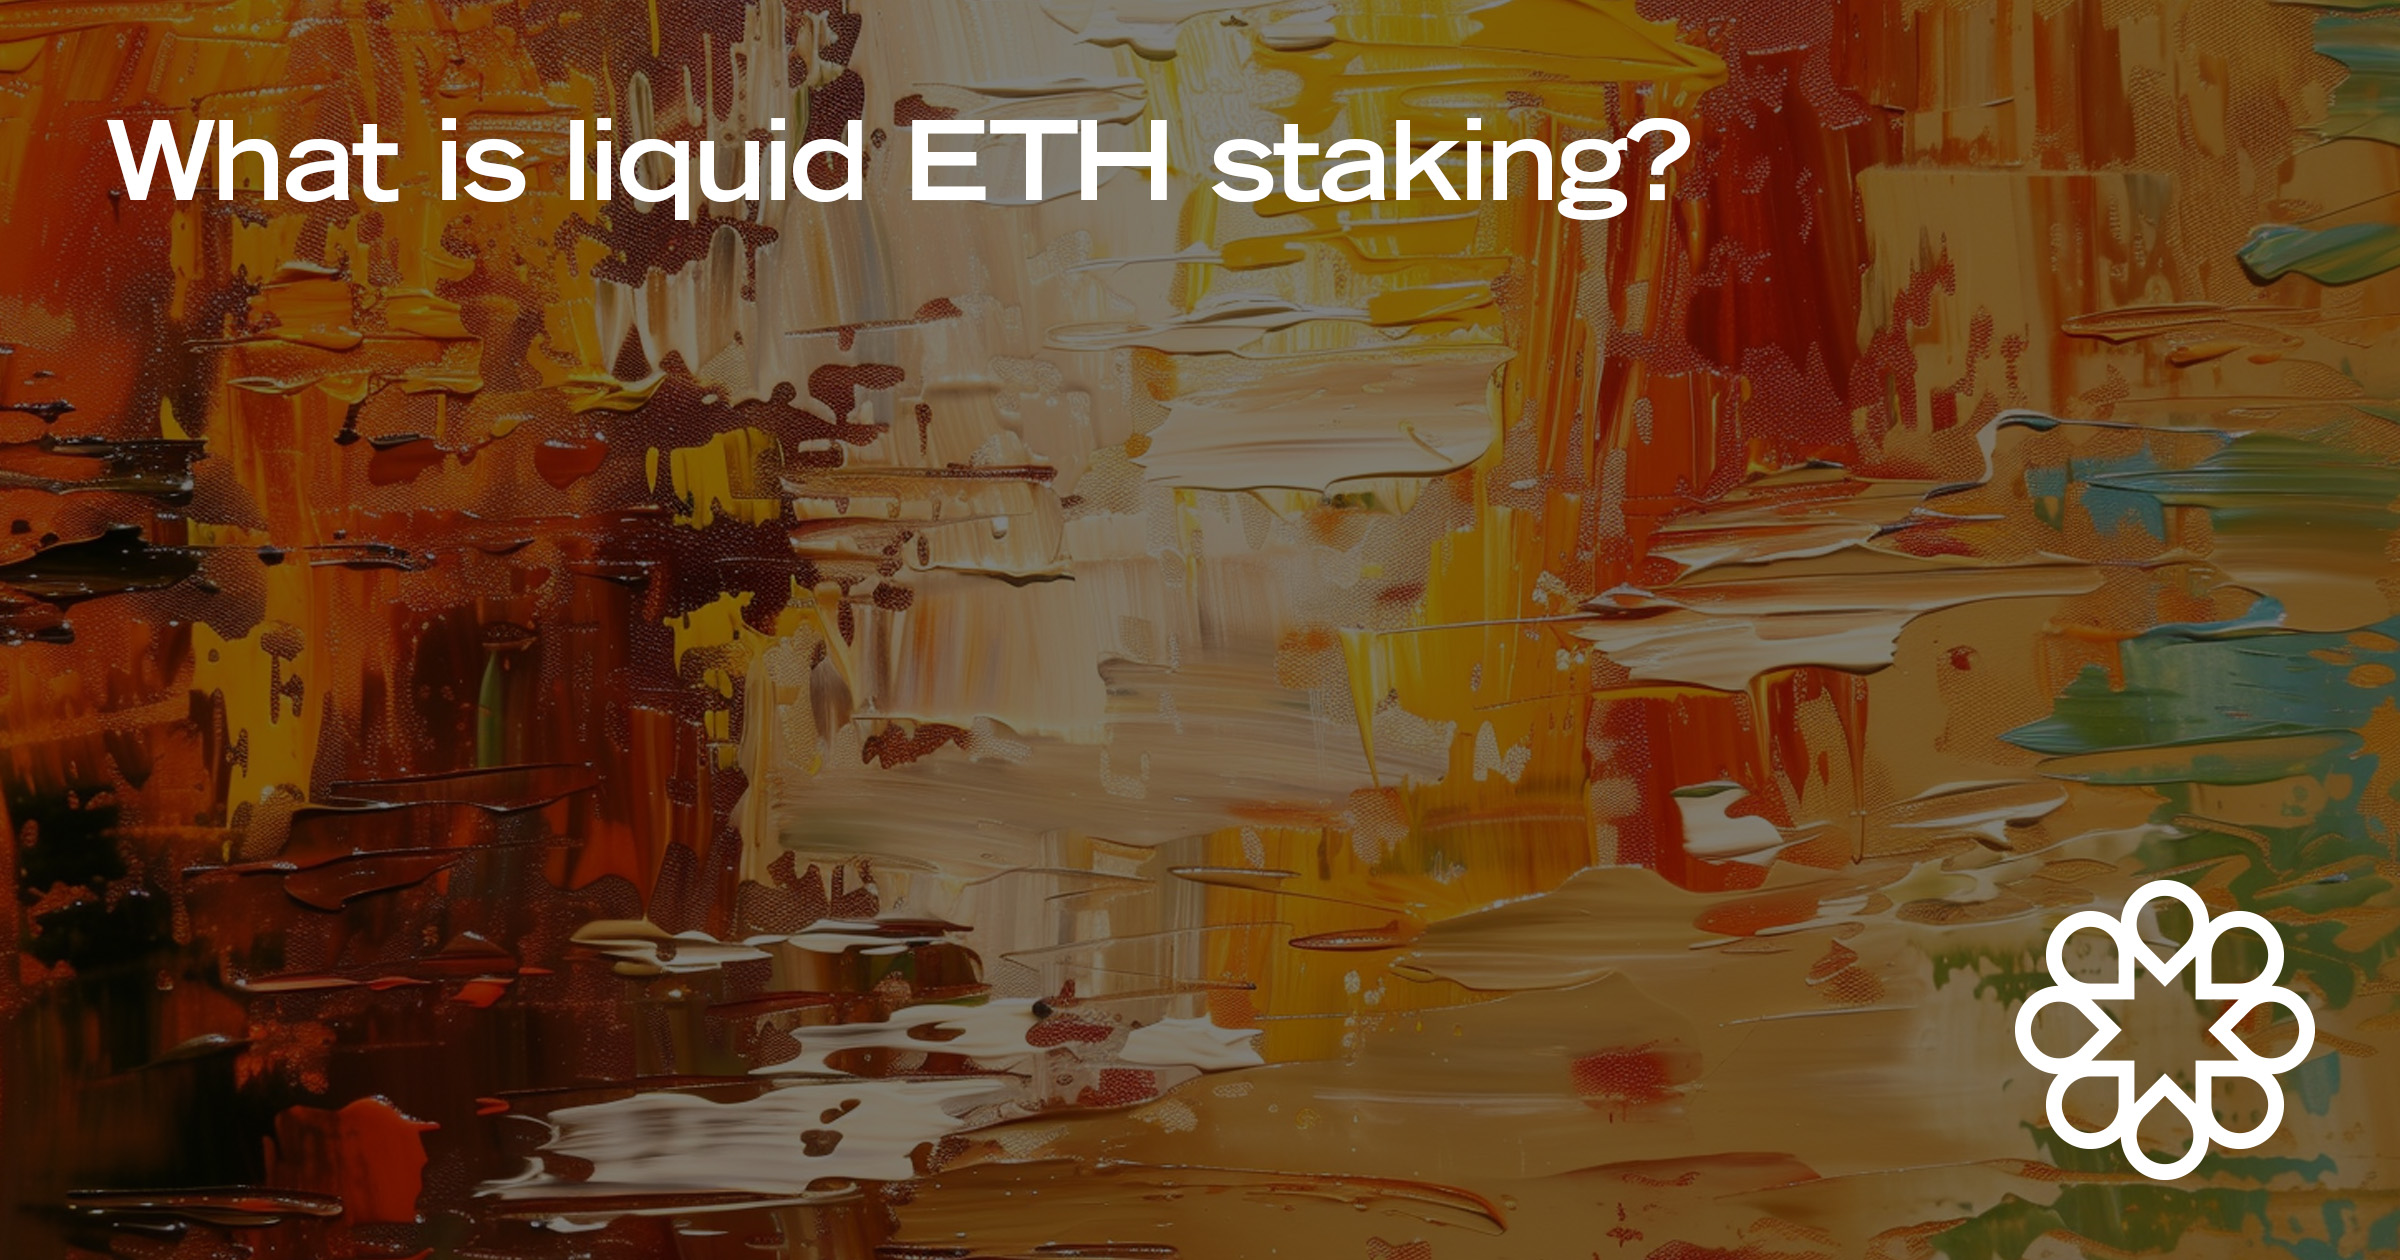 What is liquid ETH staking?